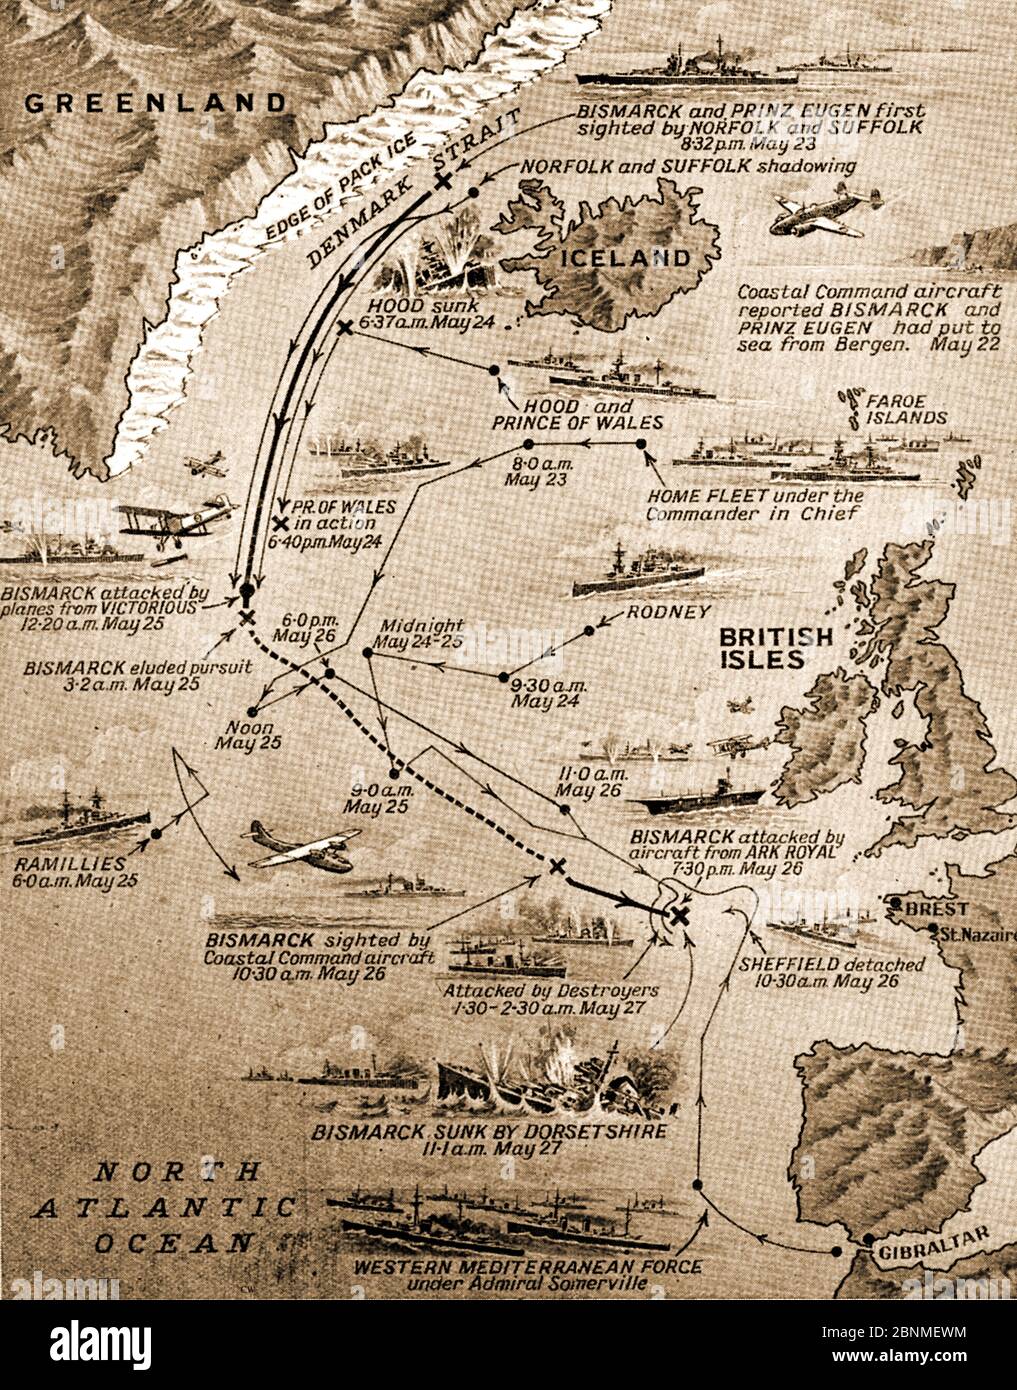 WWII -  A pictorial map from 1941   printed soon after the sinking of H.M.S. Hood  and the Bismarck showing shipping movements and their route before the sinking of the vessels. Stock Photo